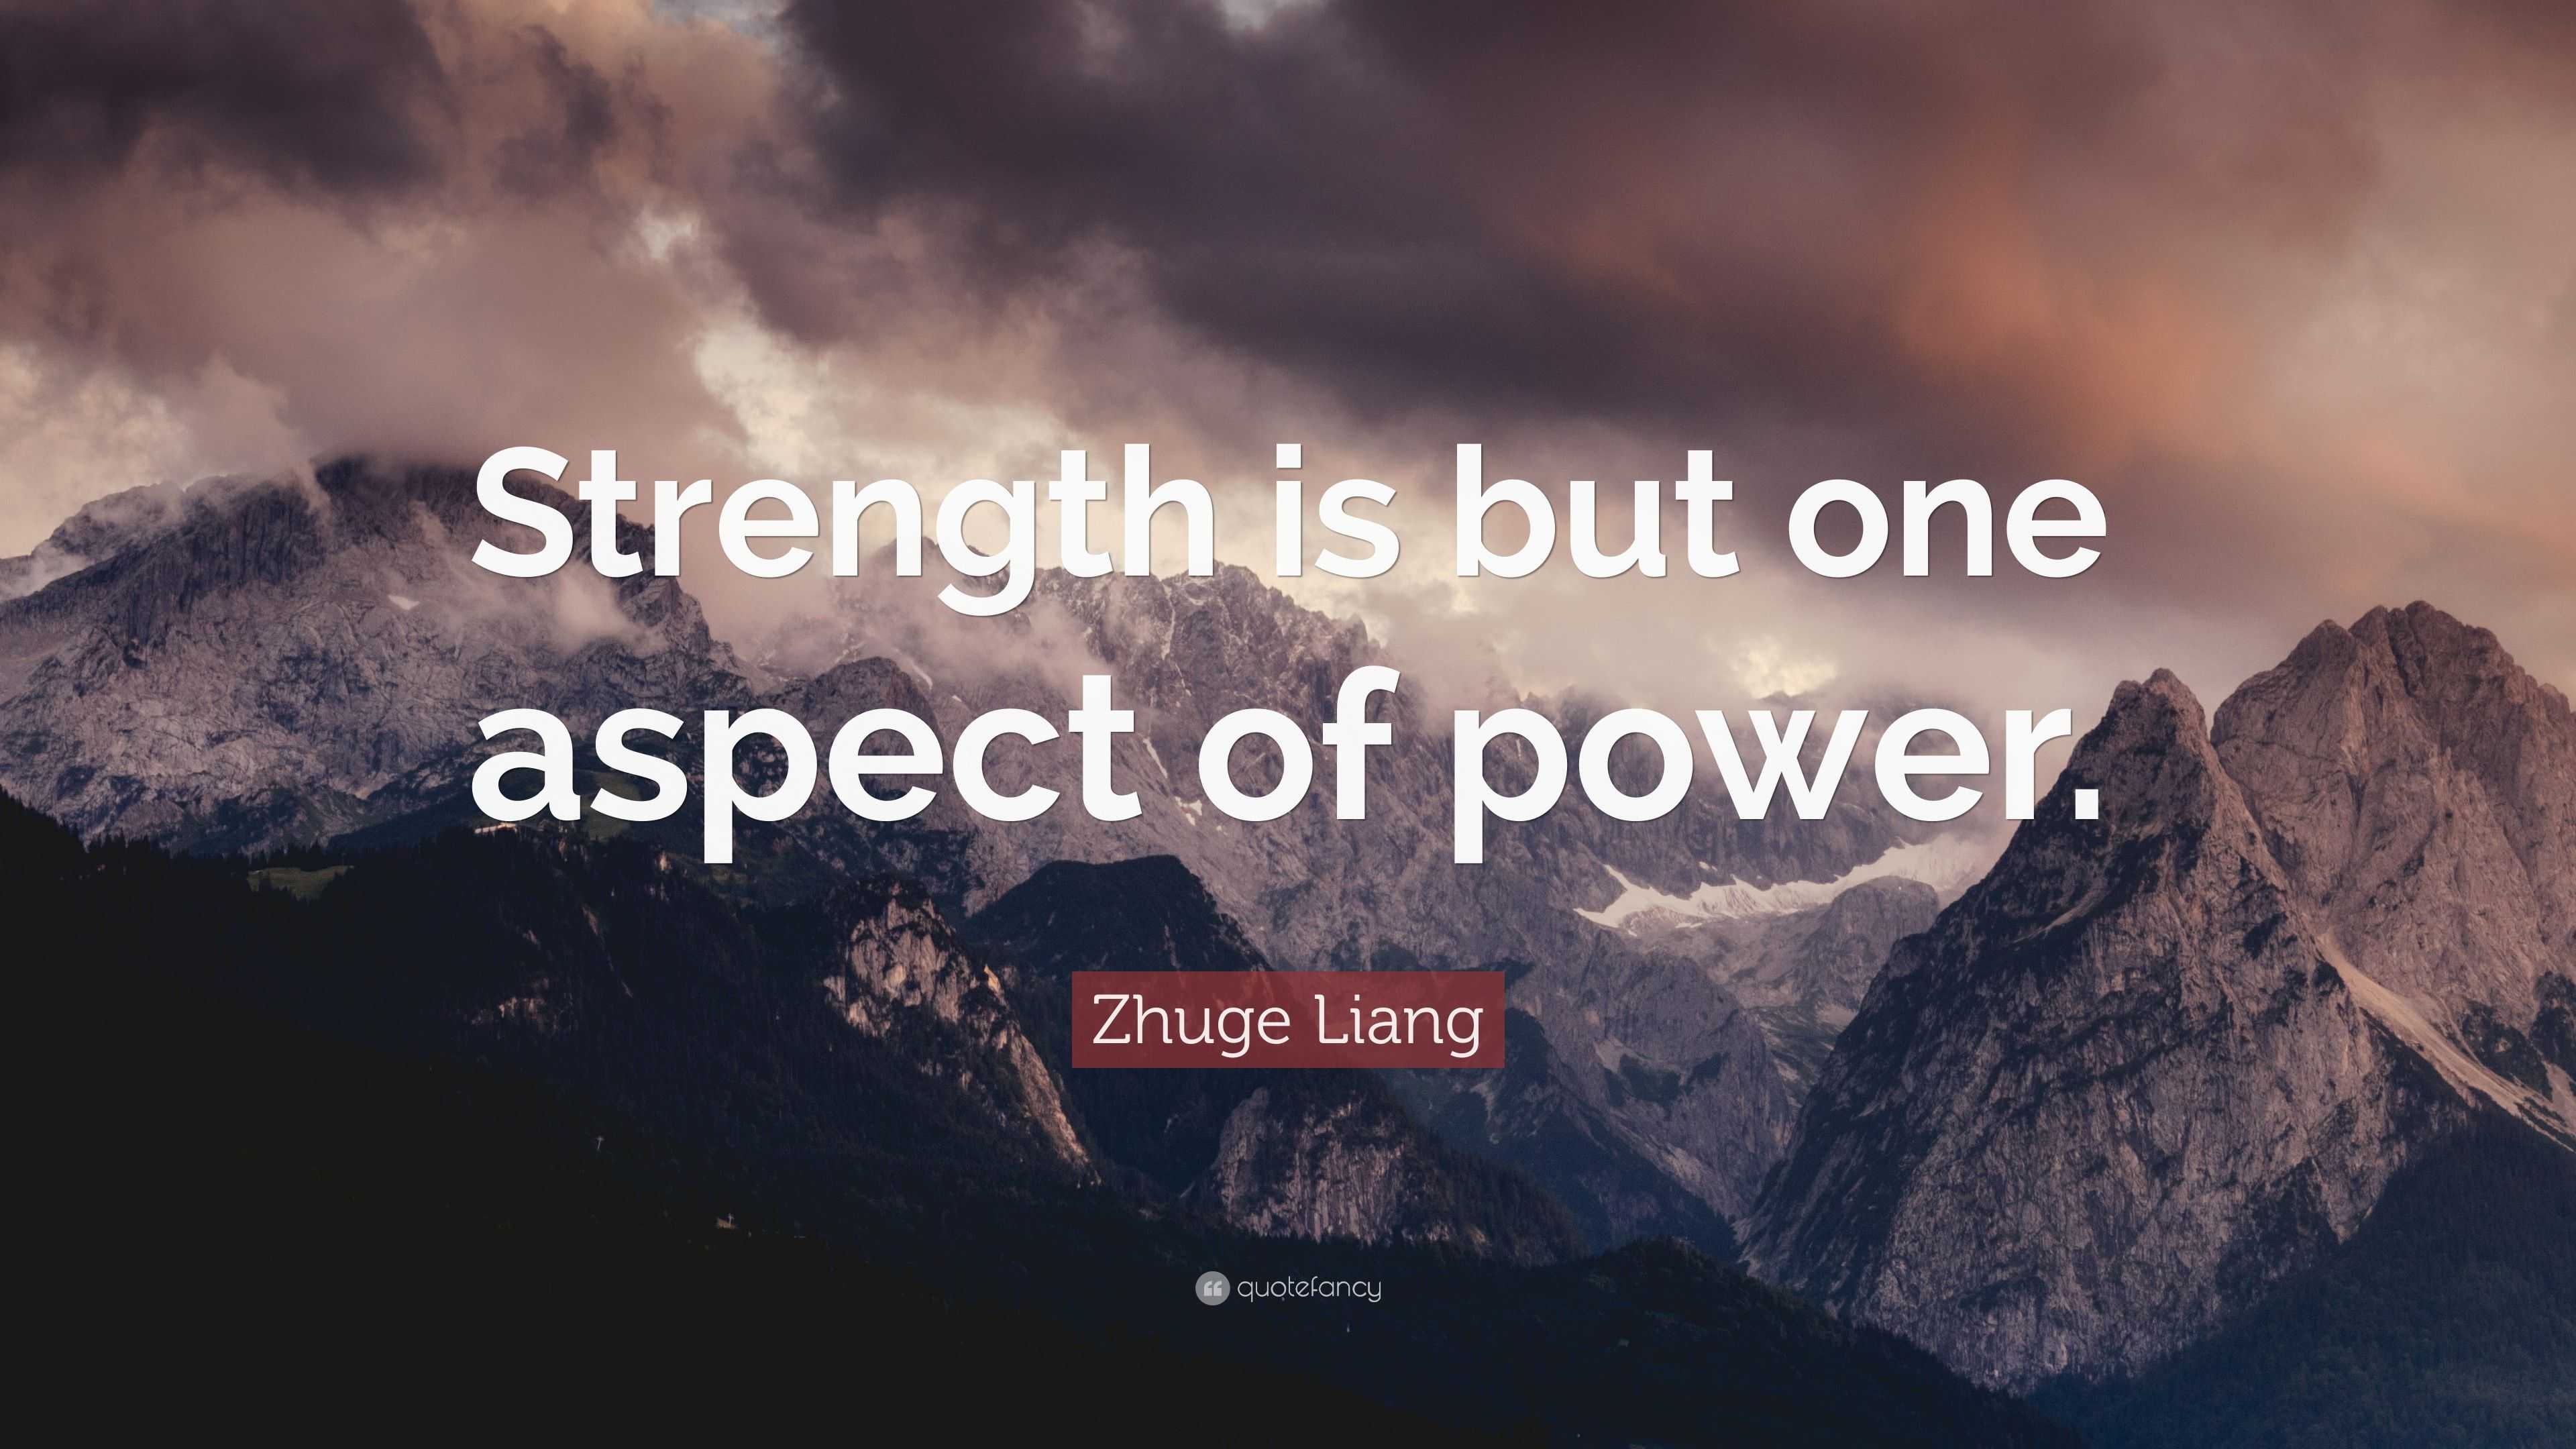 Zhuge Liang Quote: “Strength is but one aspect of power.”